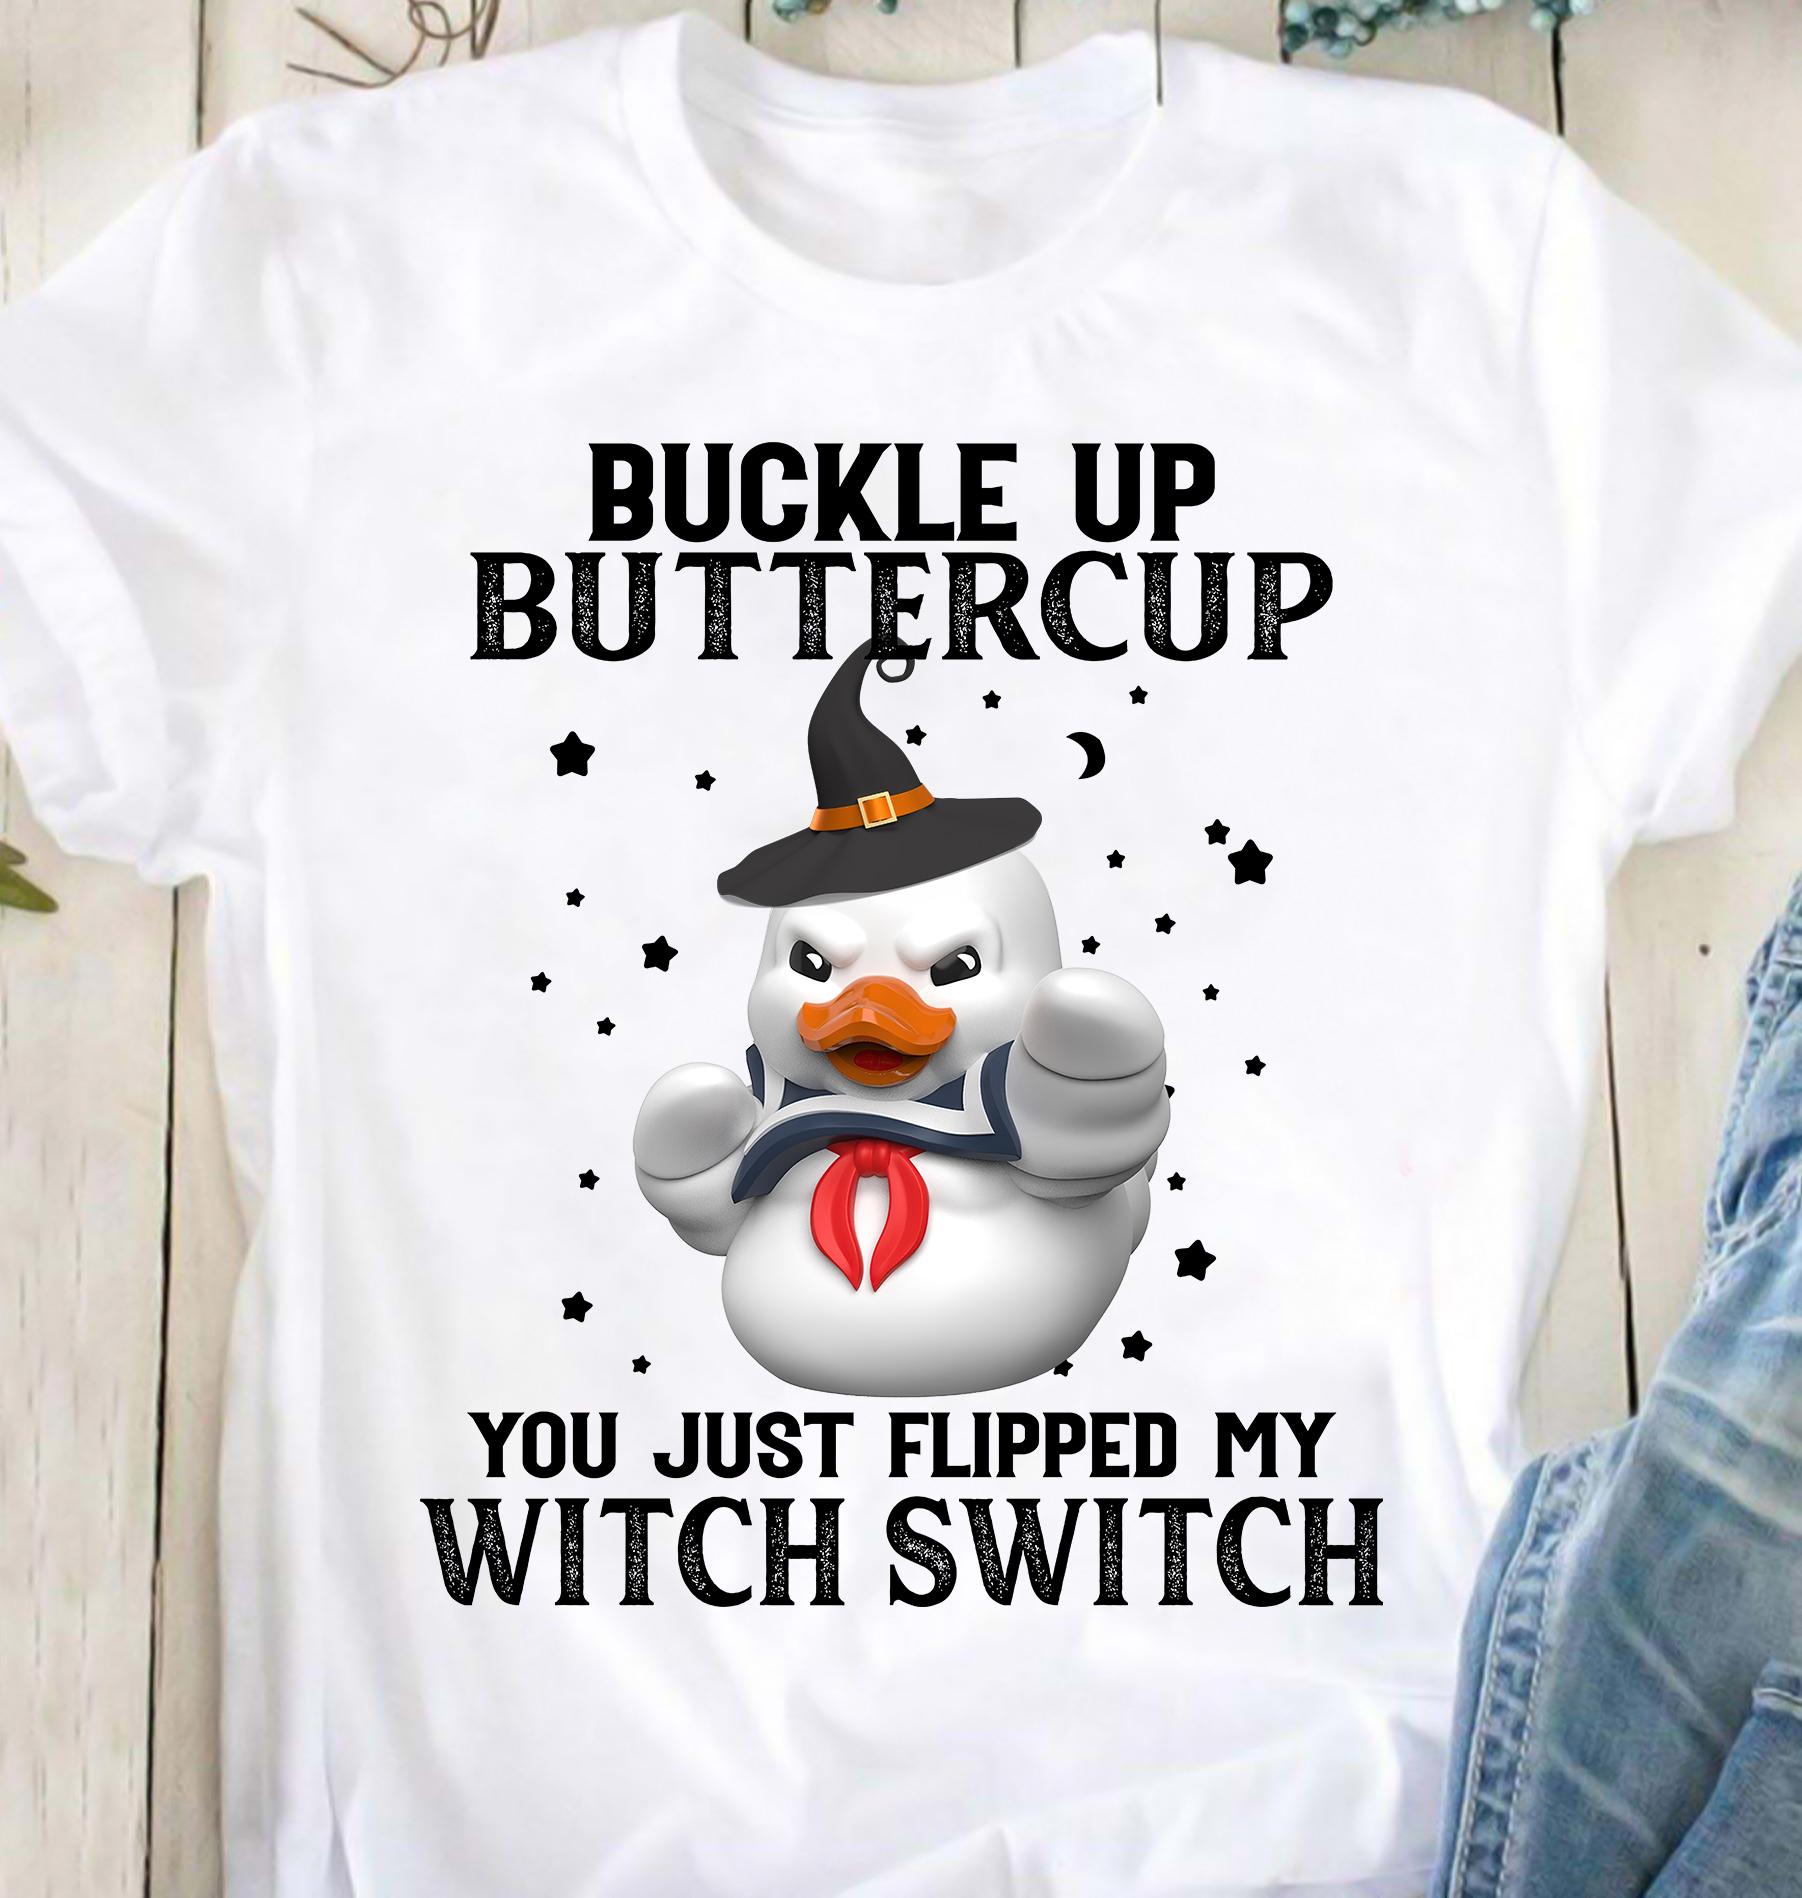 Buckle up buttercup you just flipped my witch switch - Halloween duck witch, witch costume T-shirt